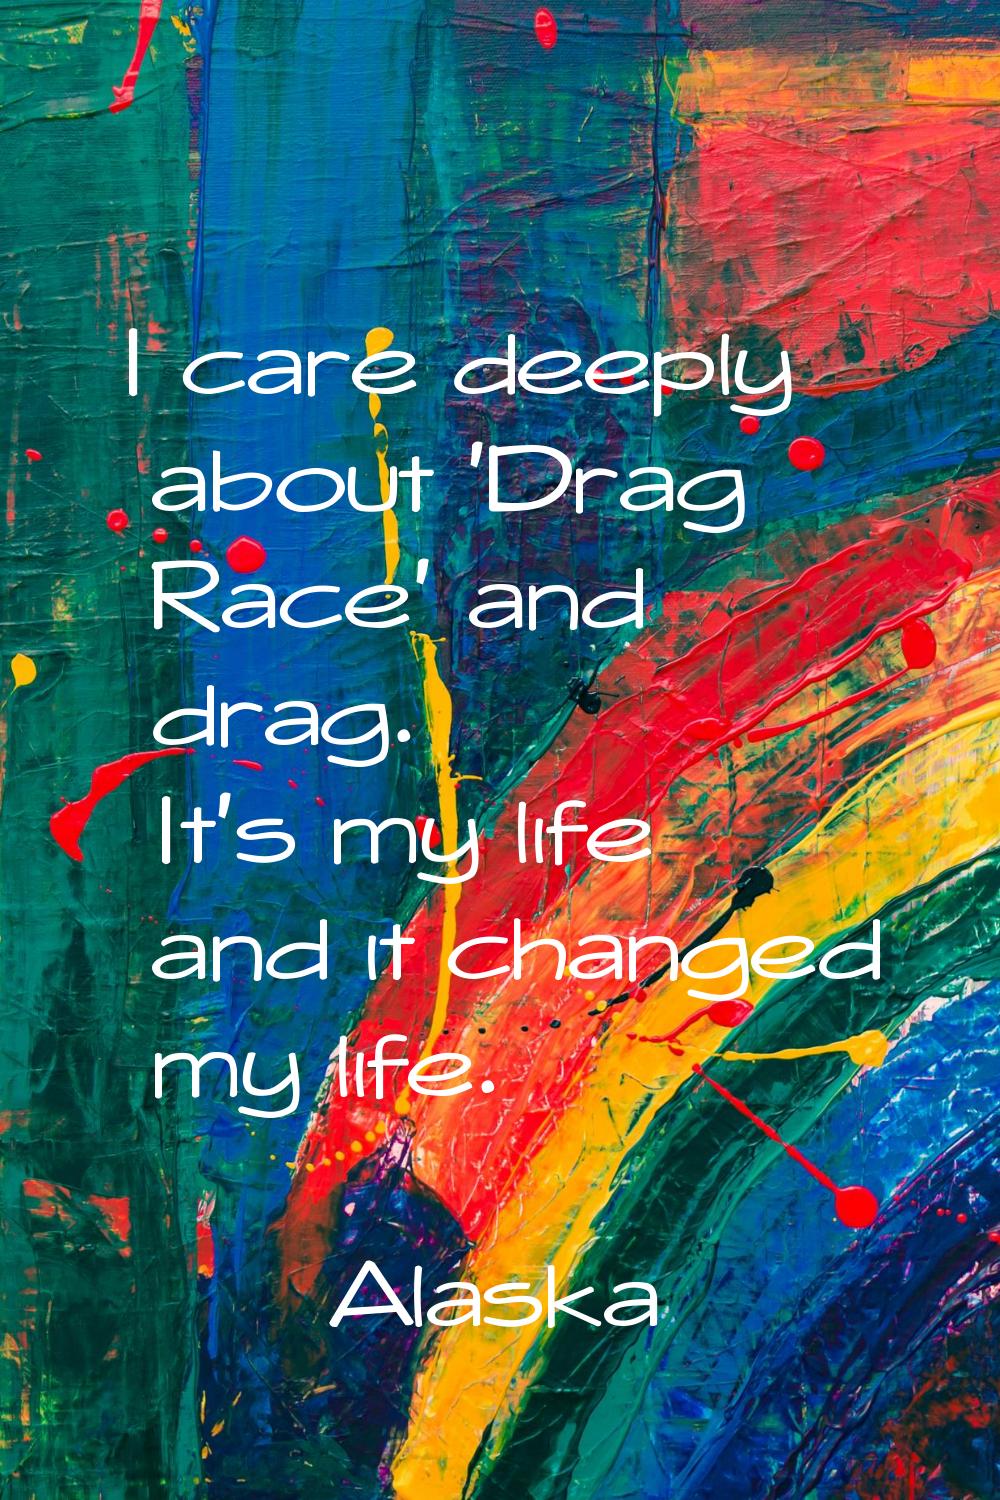 I care deeply about 'Drag Race' and drag. It's my life and it changed my life.